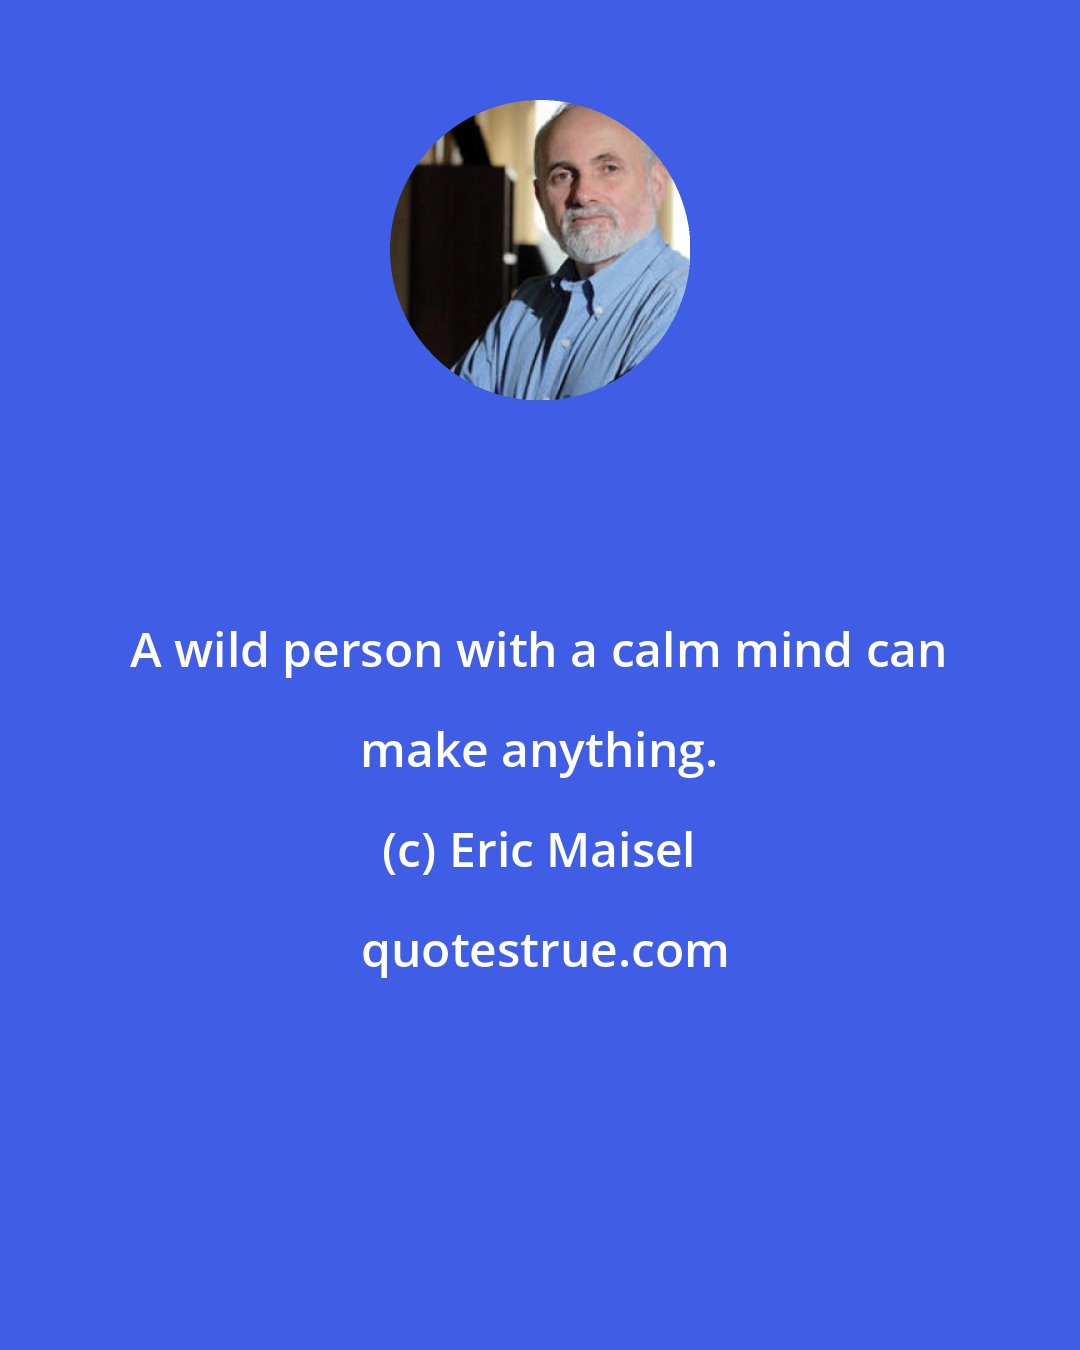 Eric Maisel: A wild person with a calm mind can make anything.